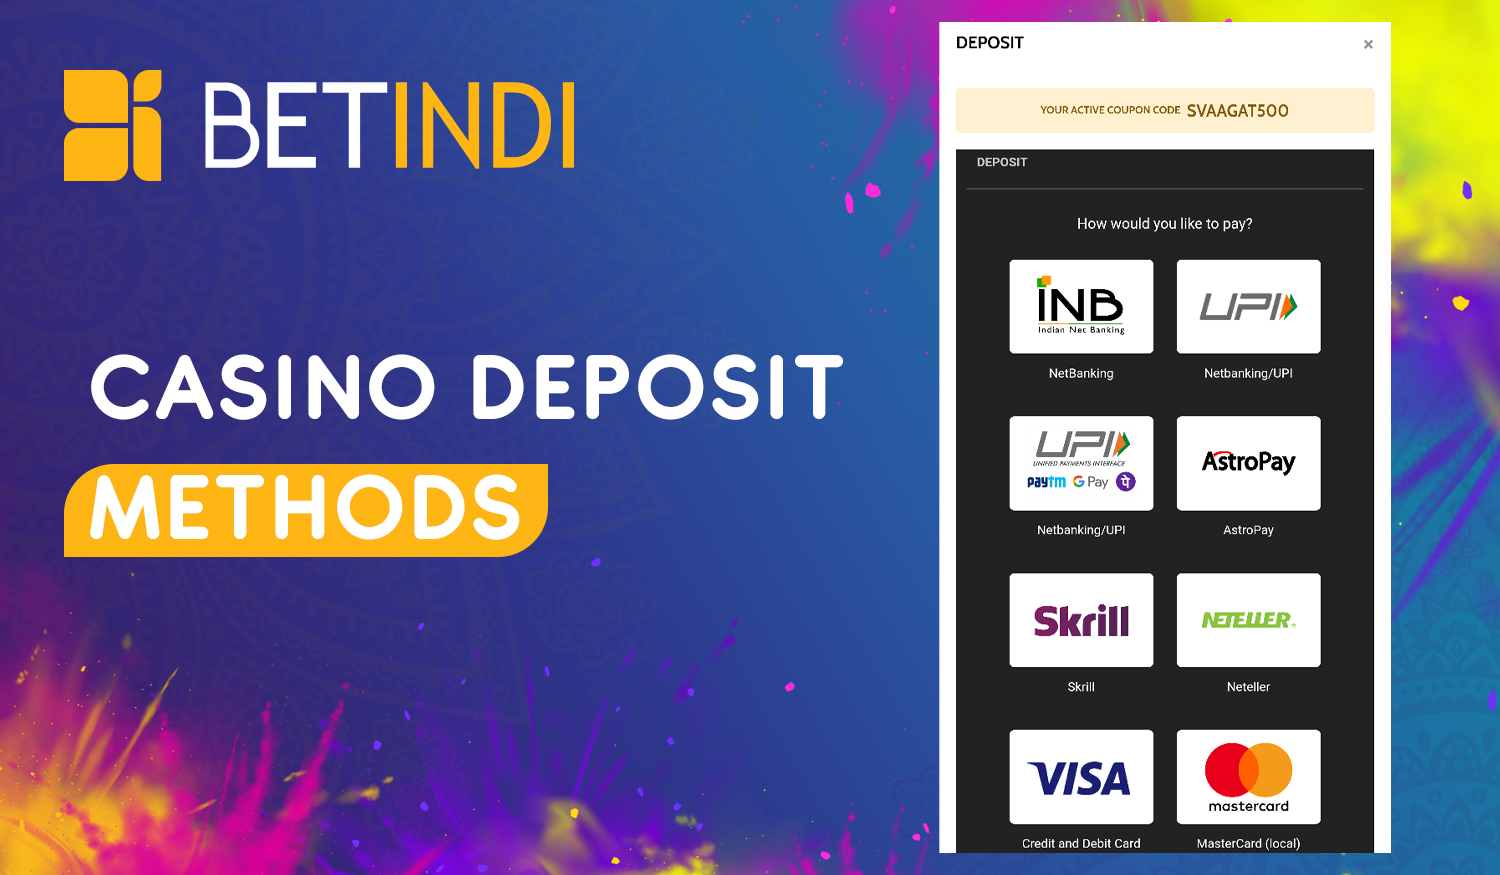 Methods, amounts and terms for deposit on the Betindi bookmaker site